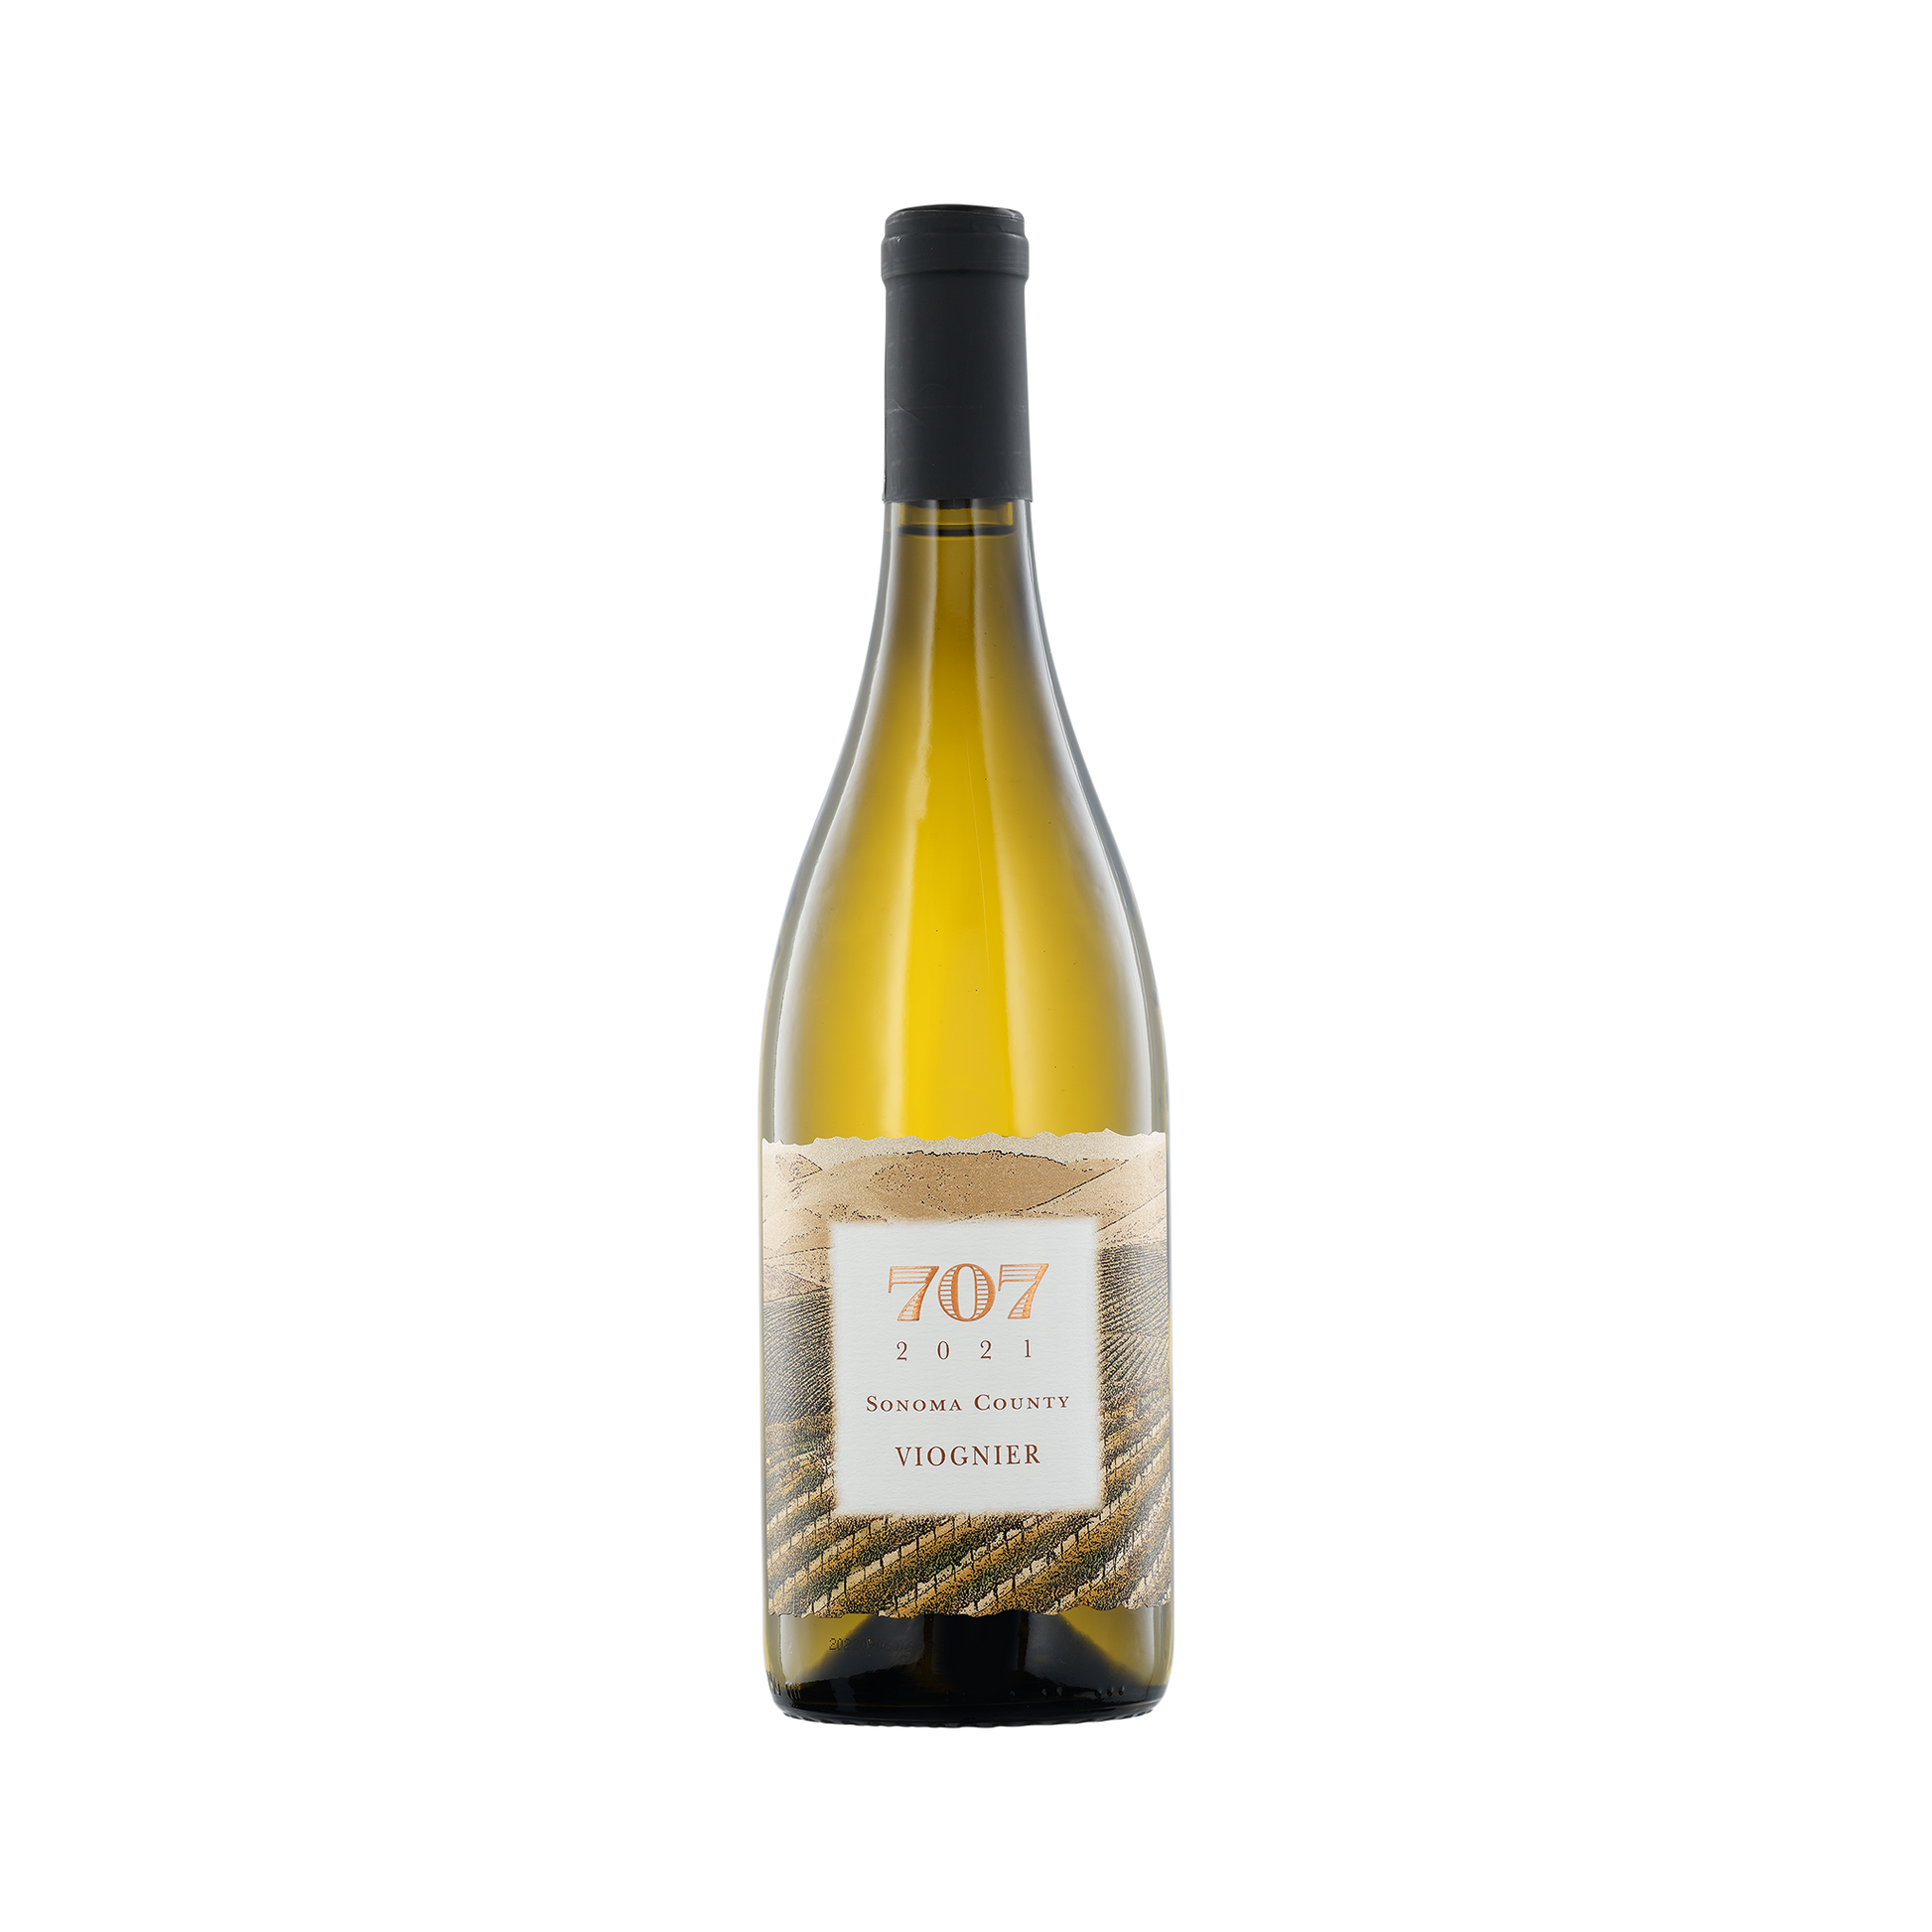 A bottle of 707 Winery 2021 Viognier